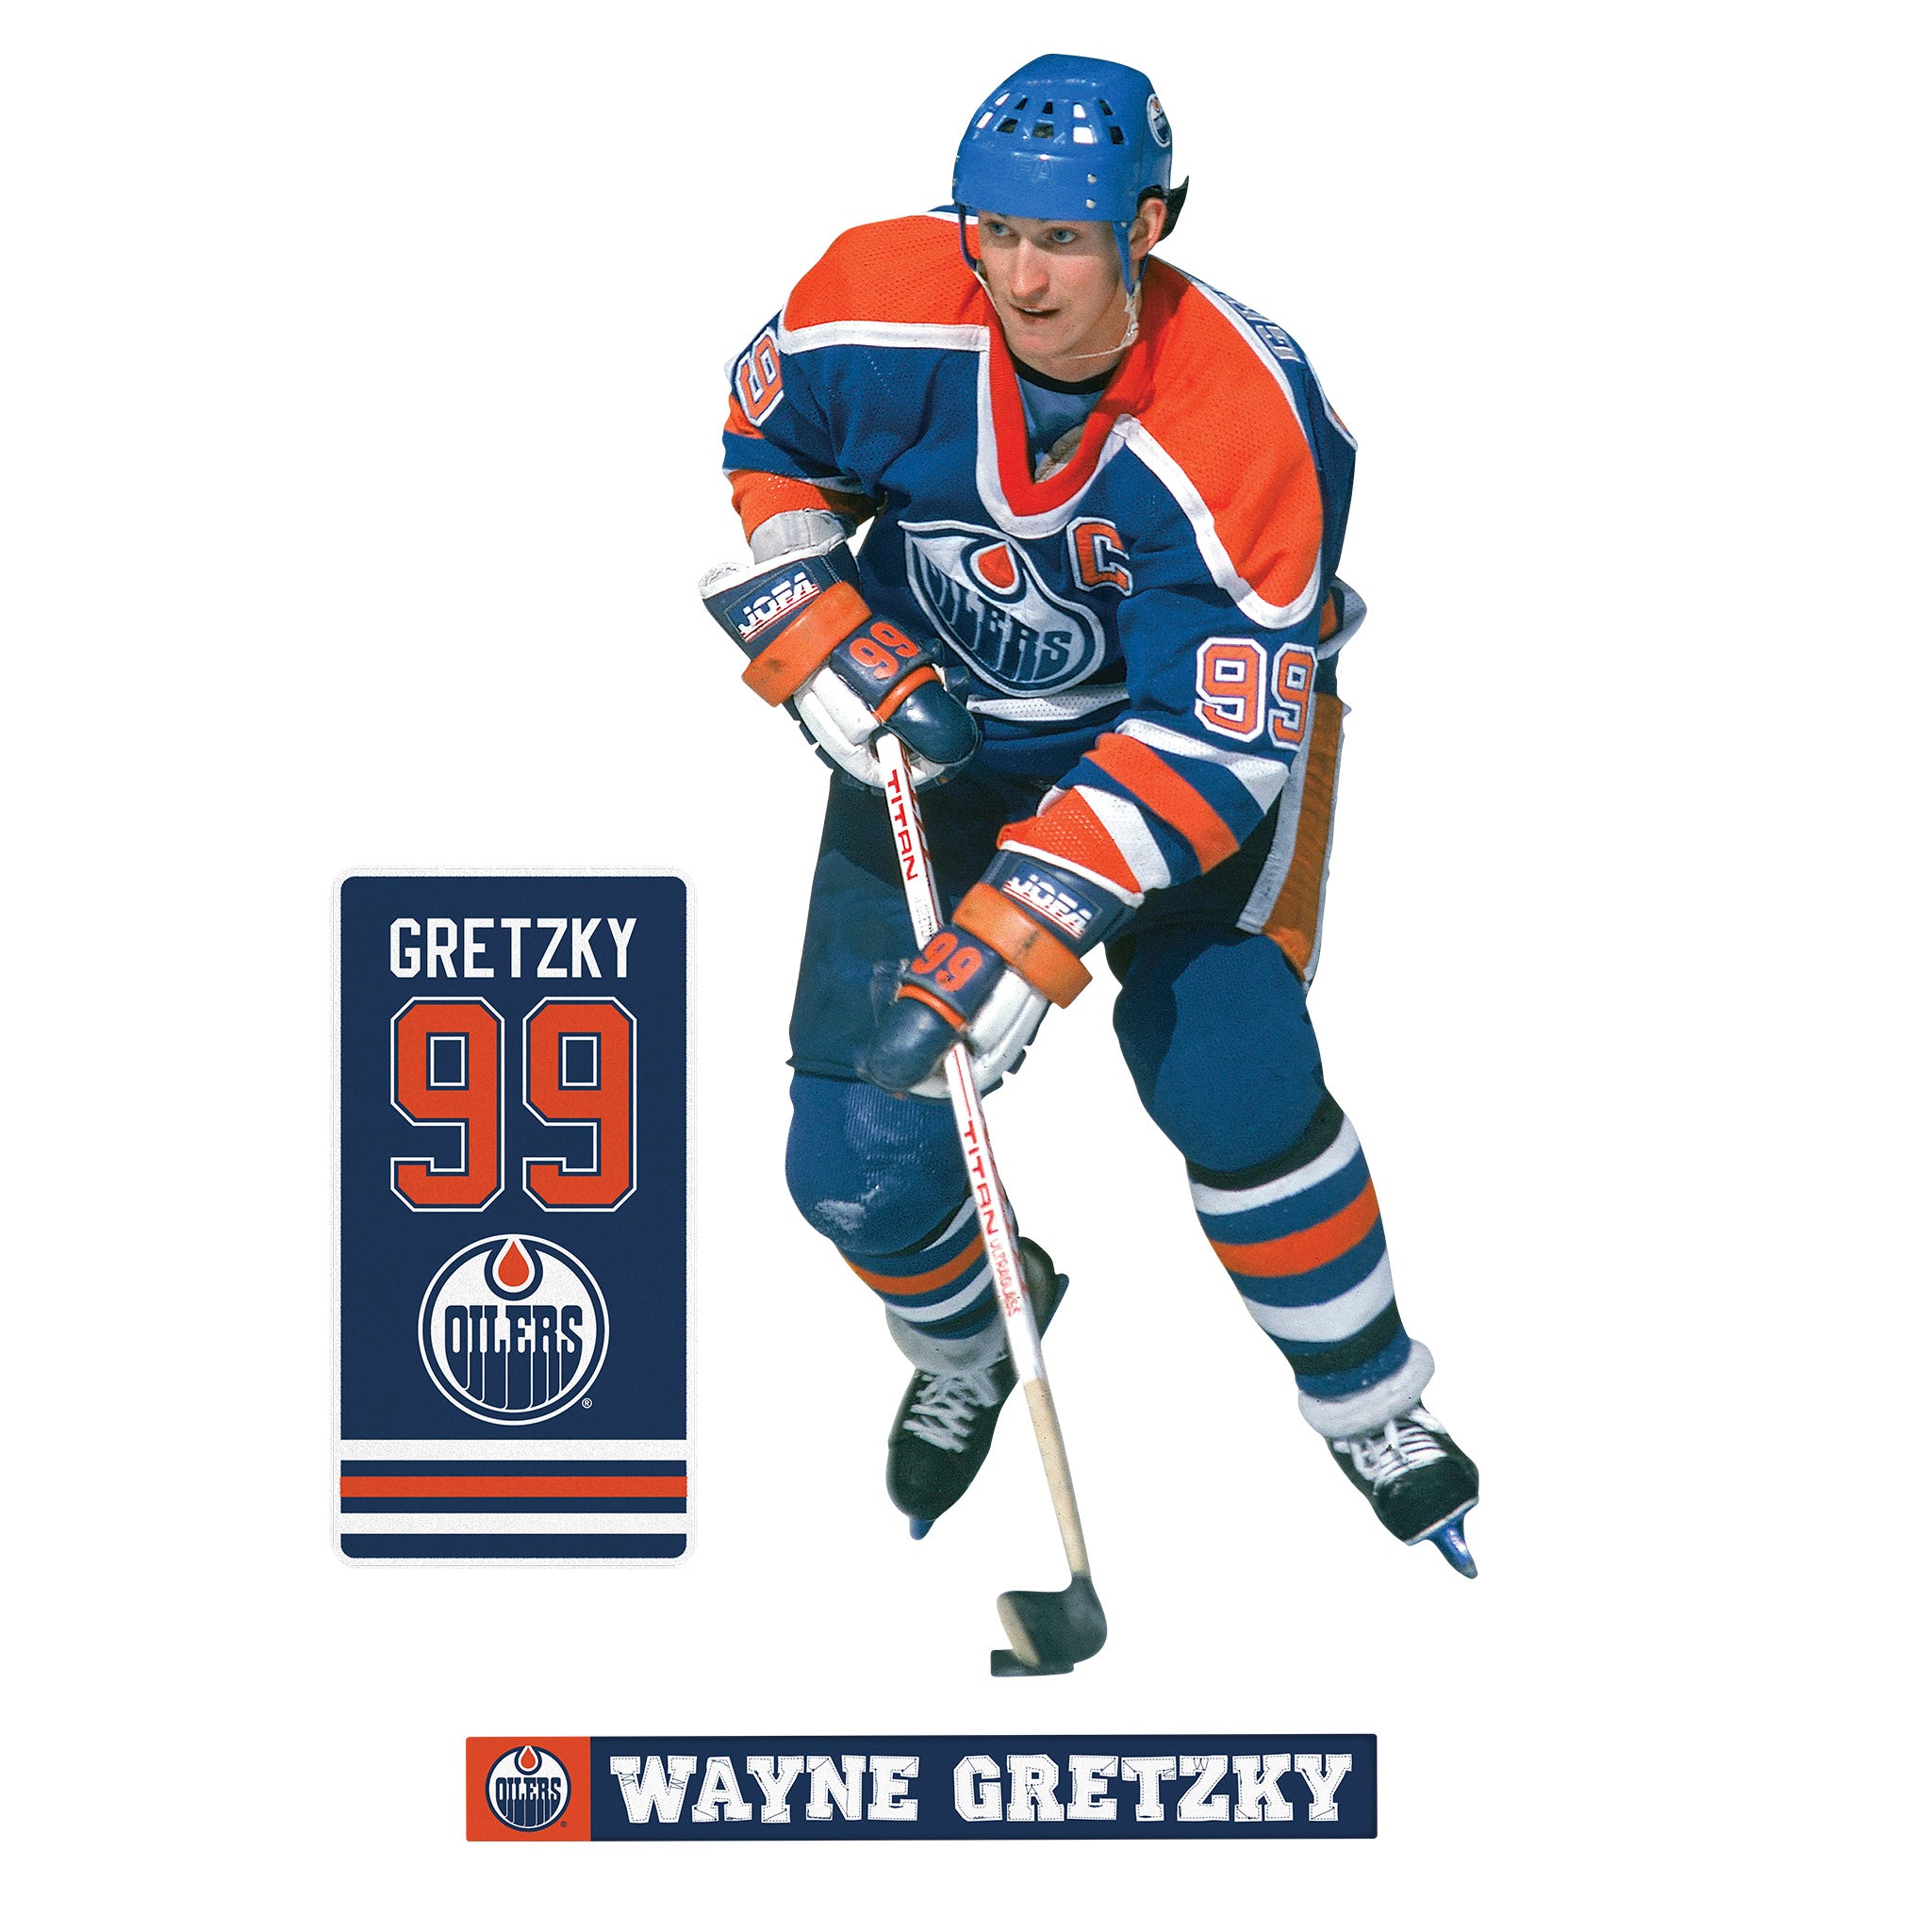 Wayne Gretzky Autographed One More Time Photo  Upper Deck